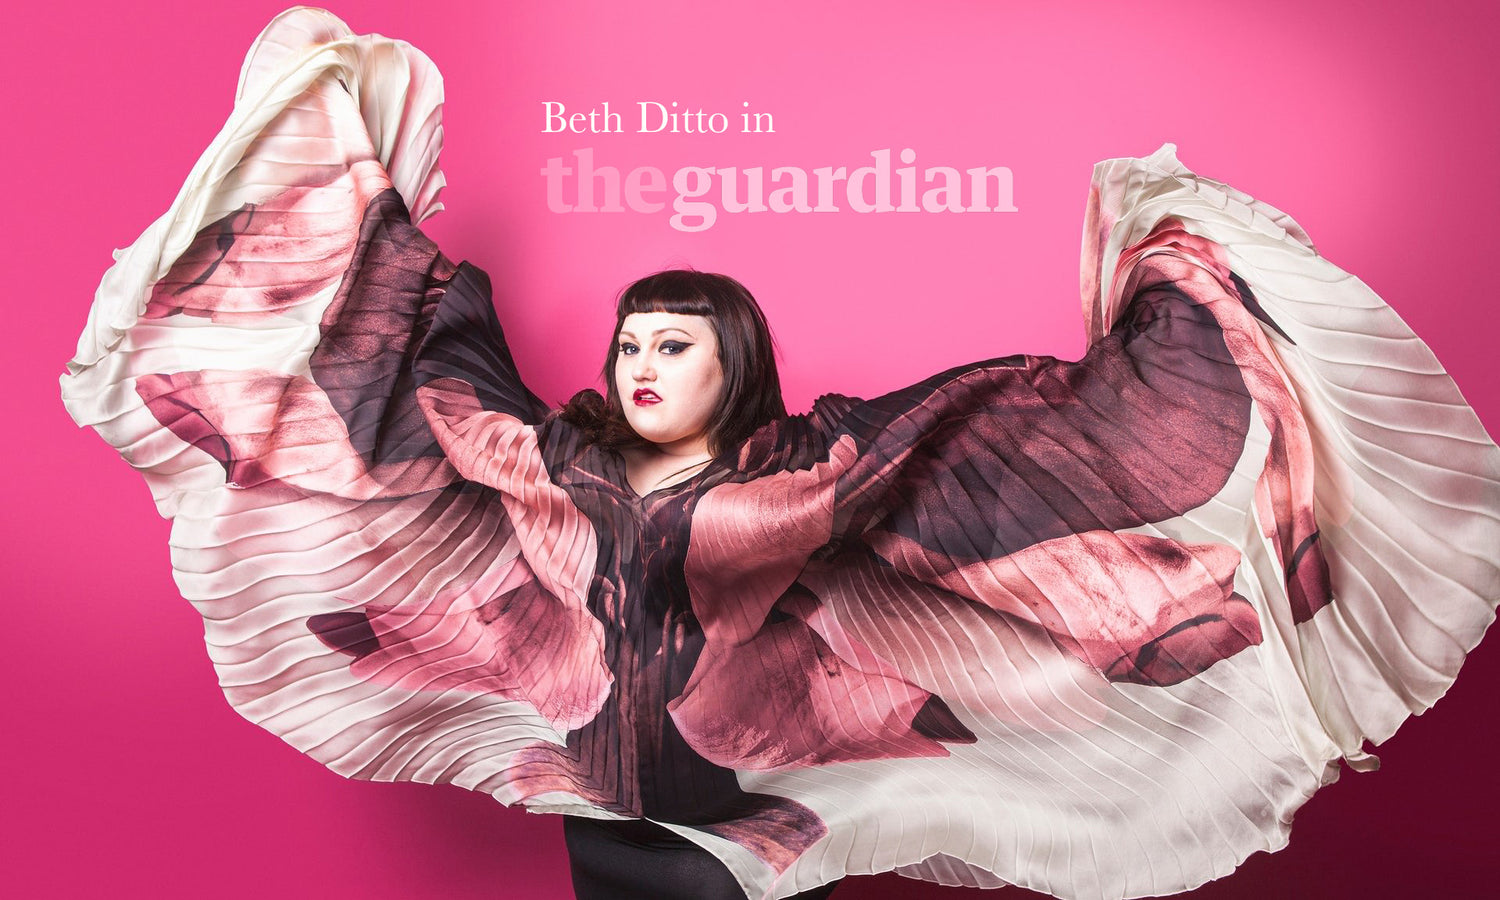 Beth Ditto in the Guardian